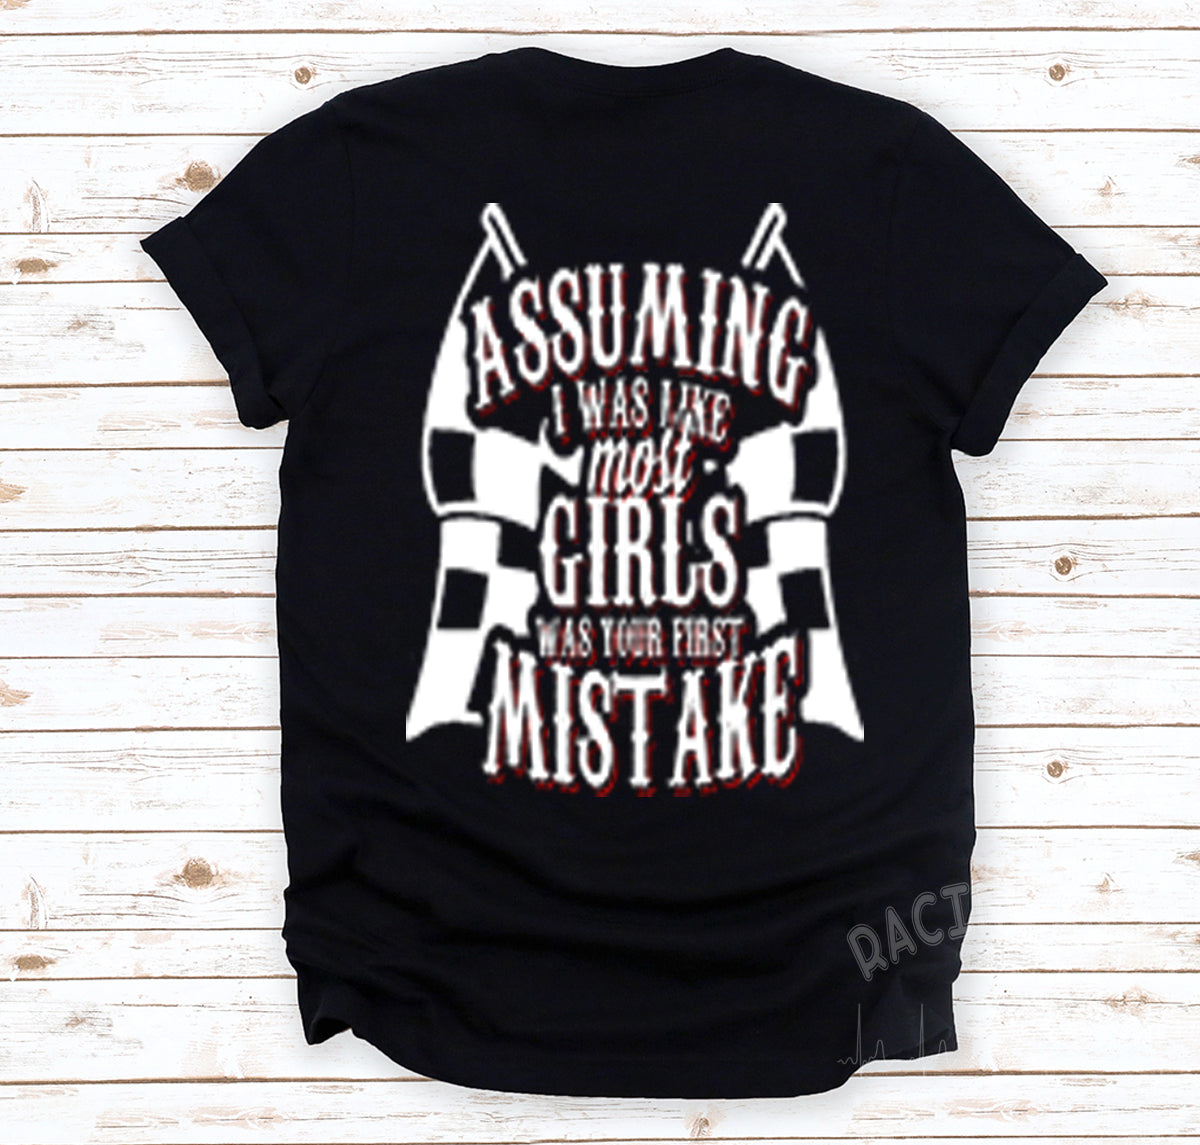 Assuming I Was Like Most Girls Was Your First Mistake DoB T-Shirts!